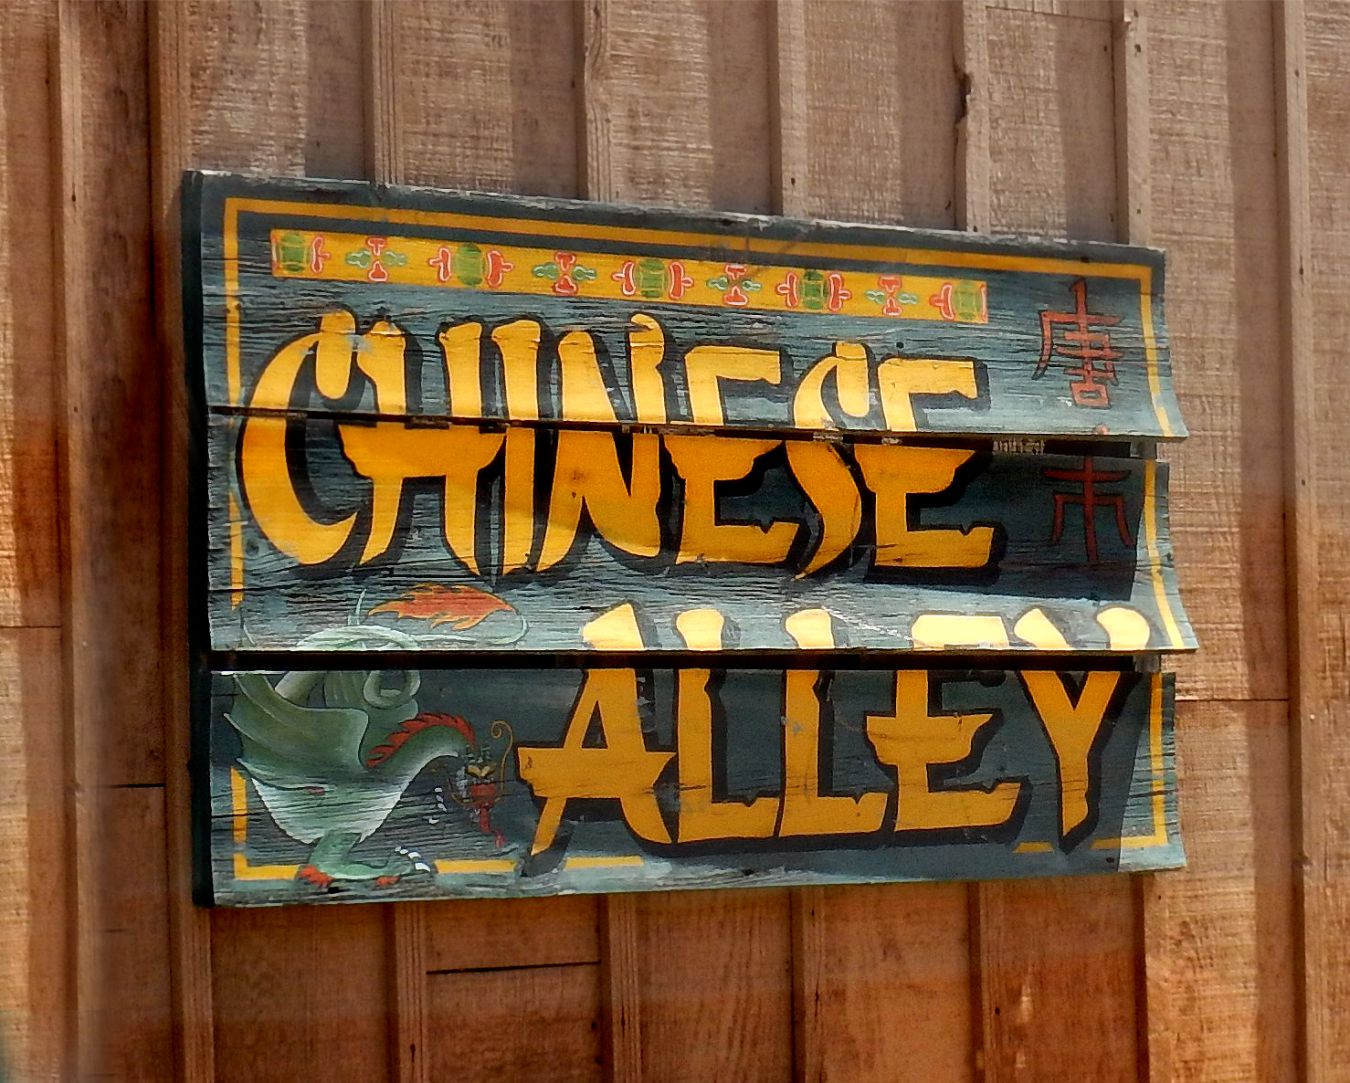 Old Tucson Studios Chinese Alley